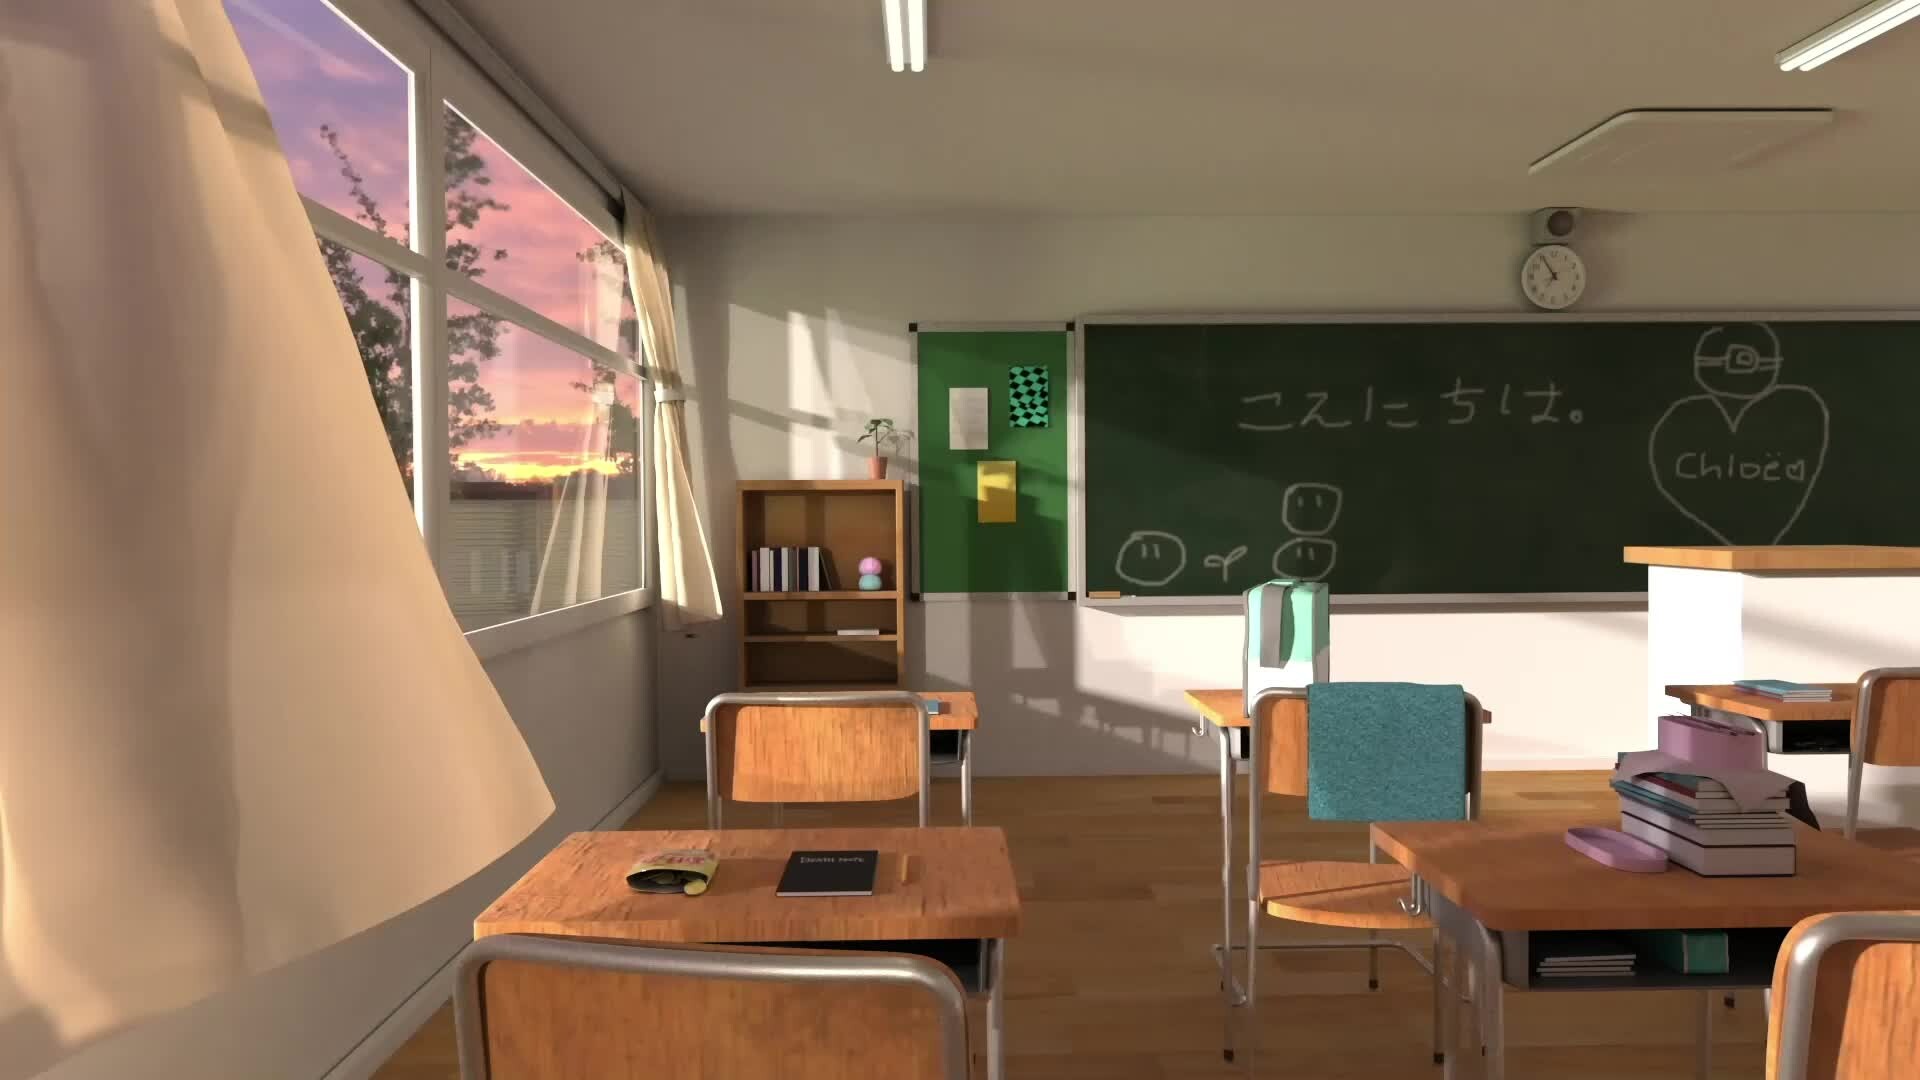 Classroom Overcast 2d Anime Background Illustration Stock Illustration -  Download Image Now - iStock